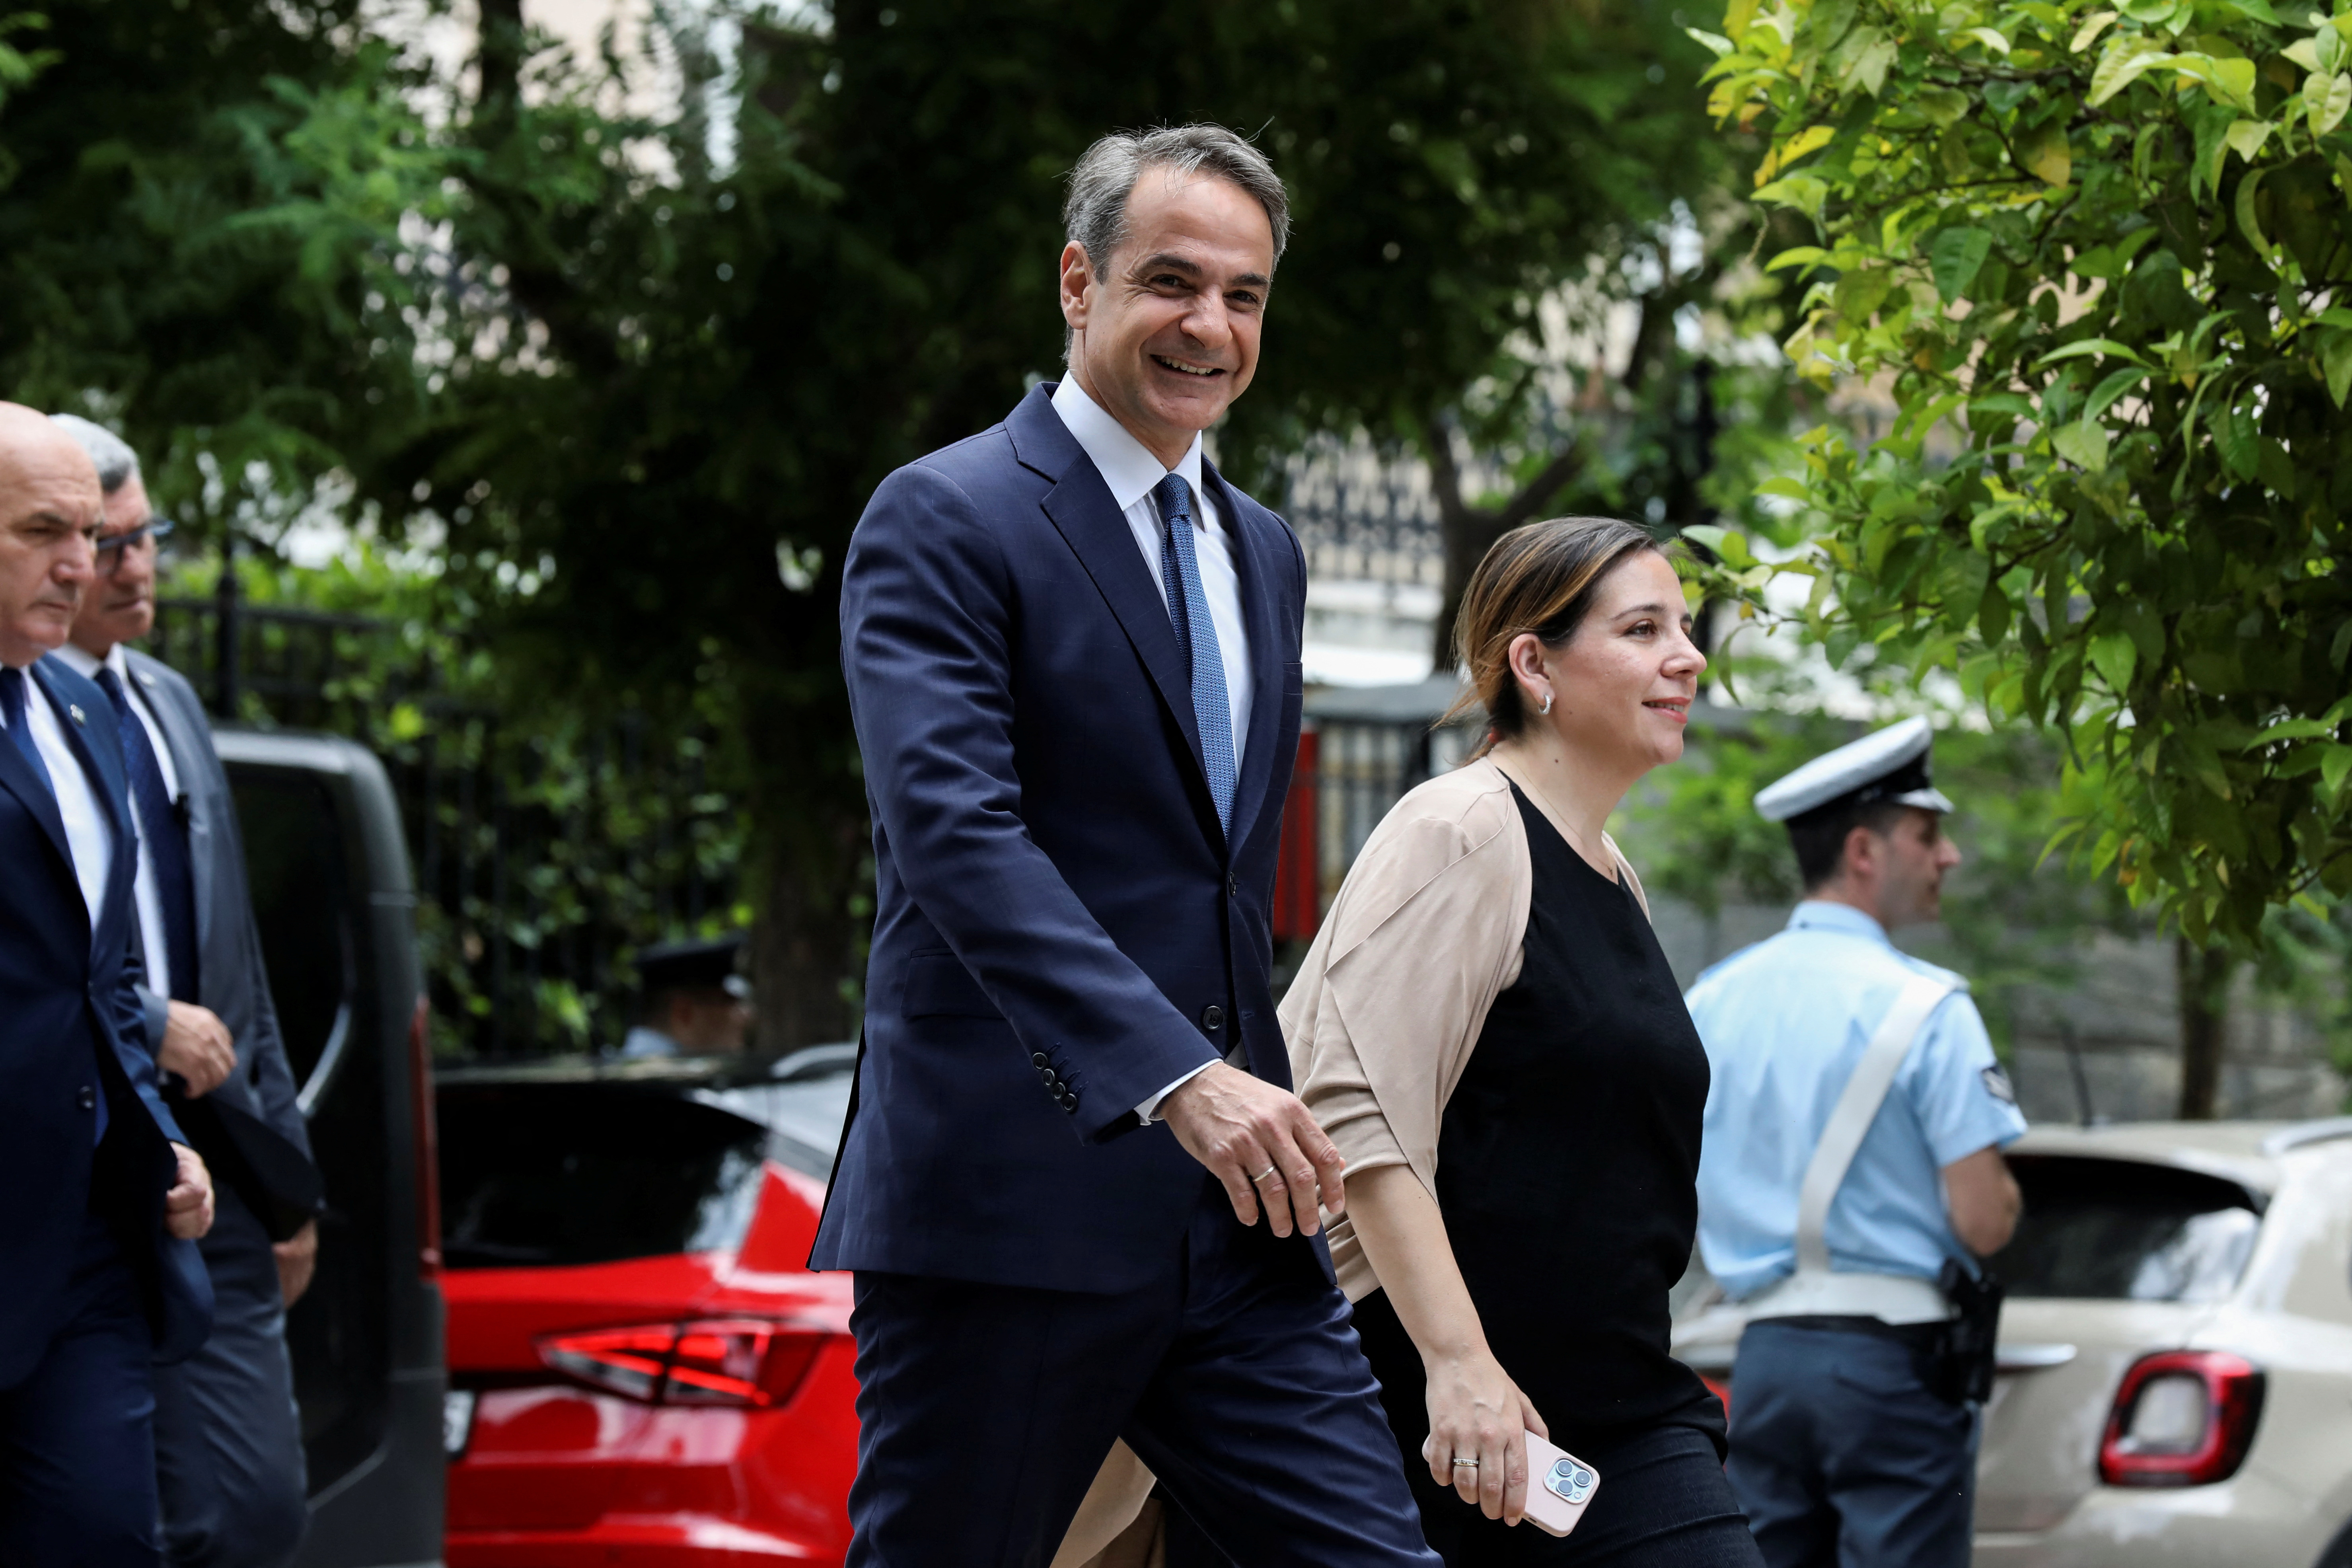 After no outright victory, Greek PM to get mandate for coalition